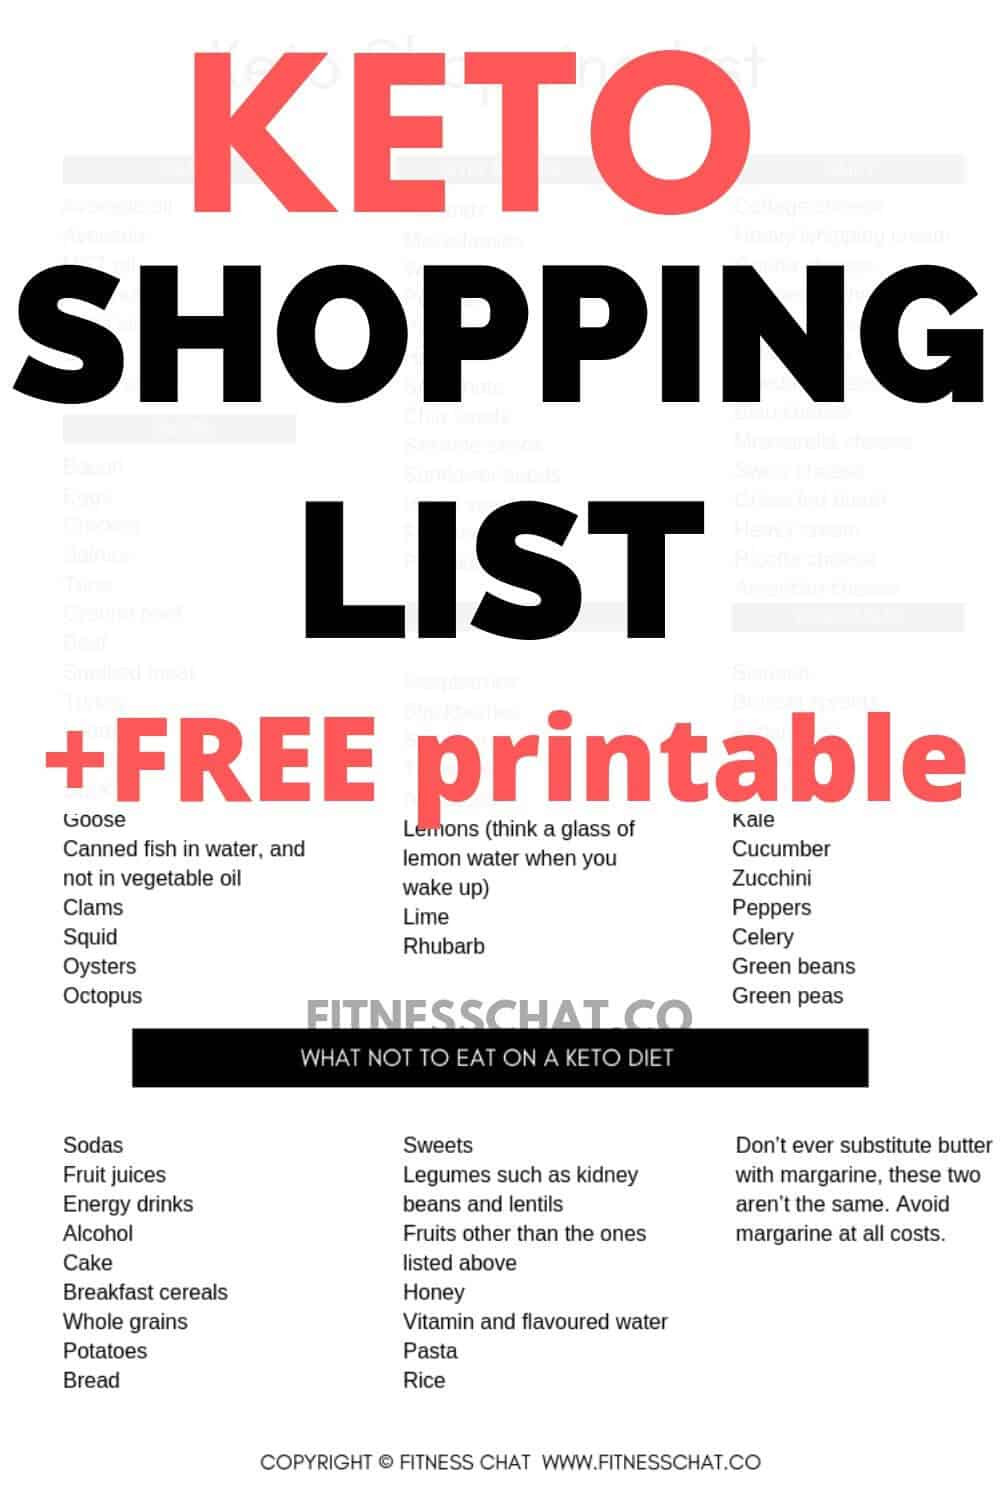 Keto Diet For Beginners Meal Plan With Grocery List
 Keto Shopping List The Ultimate Grocery List for Beginners